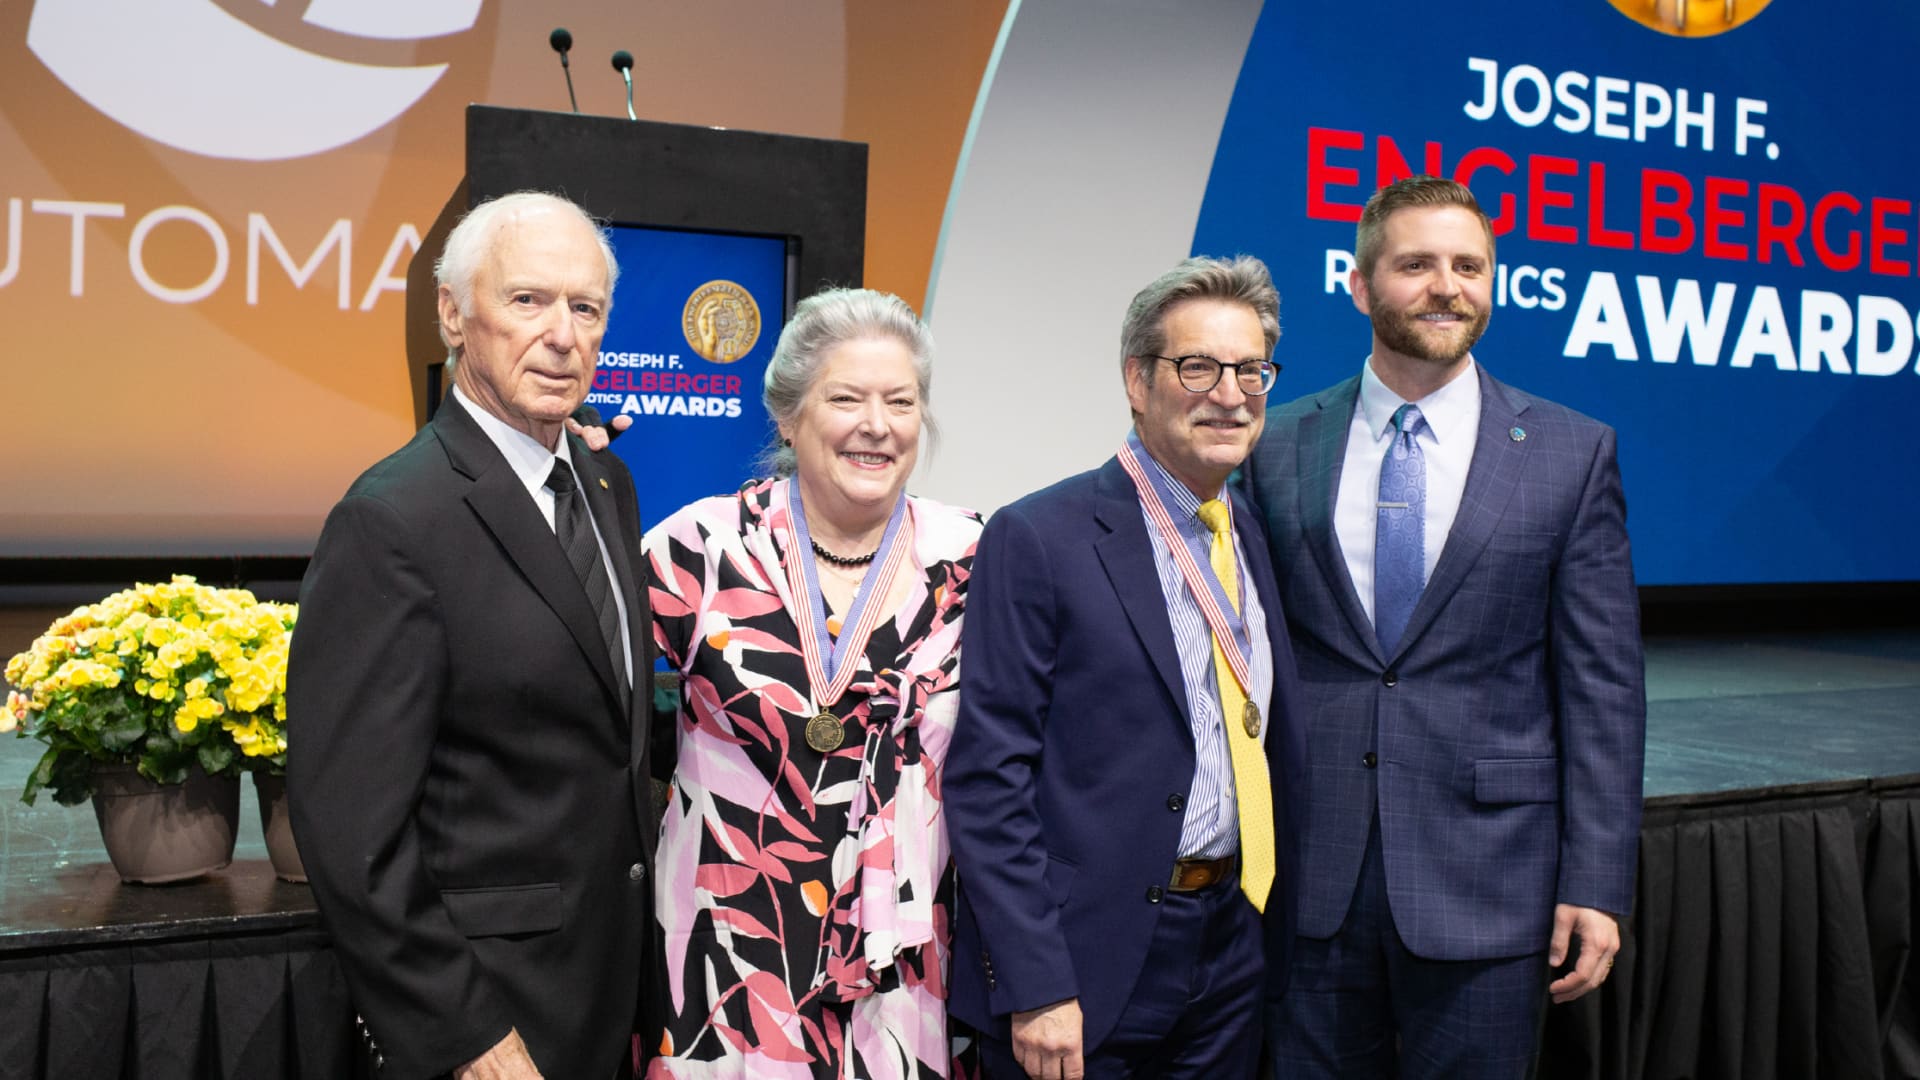 Jeff Burnstein (right center), president of the Association for Advancing Automation, after receiving a Joseph F. Engelberger Robotics Award for his more than 40-year career in the industry.